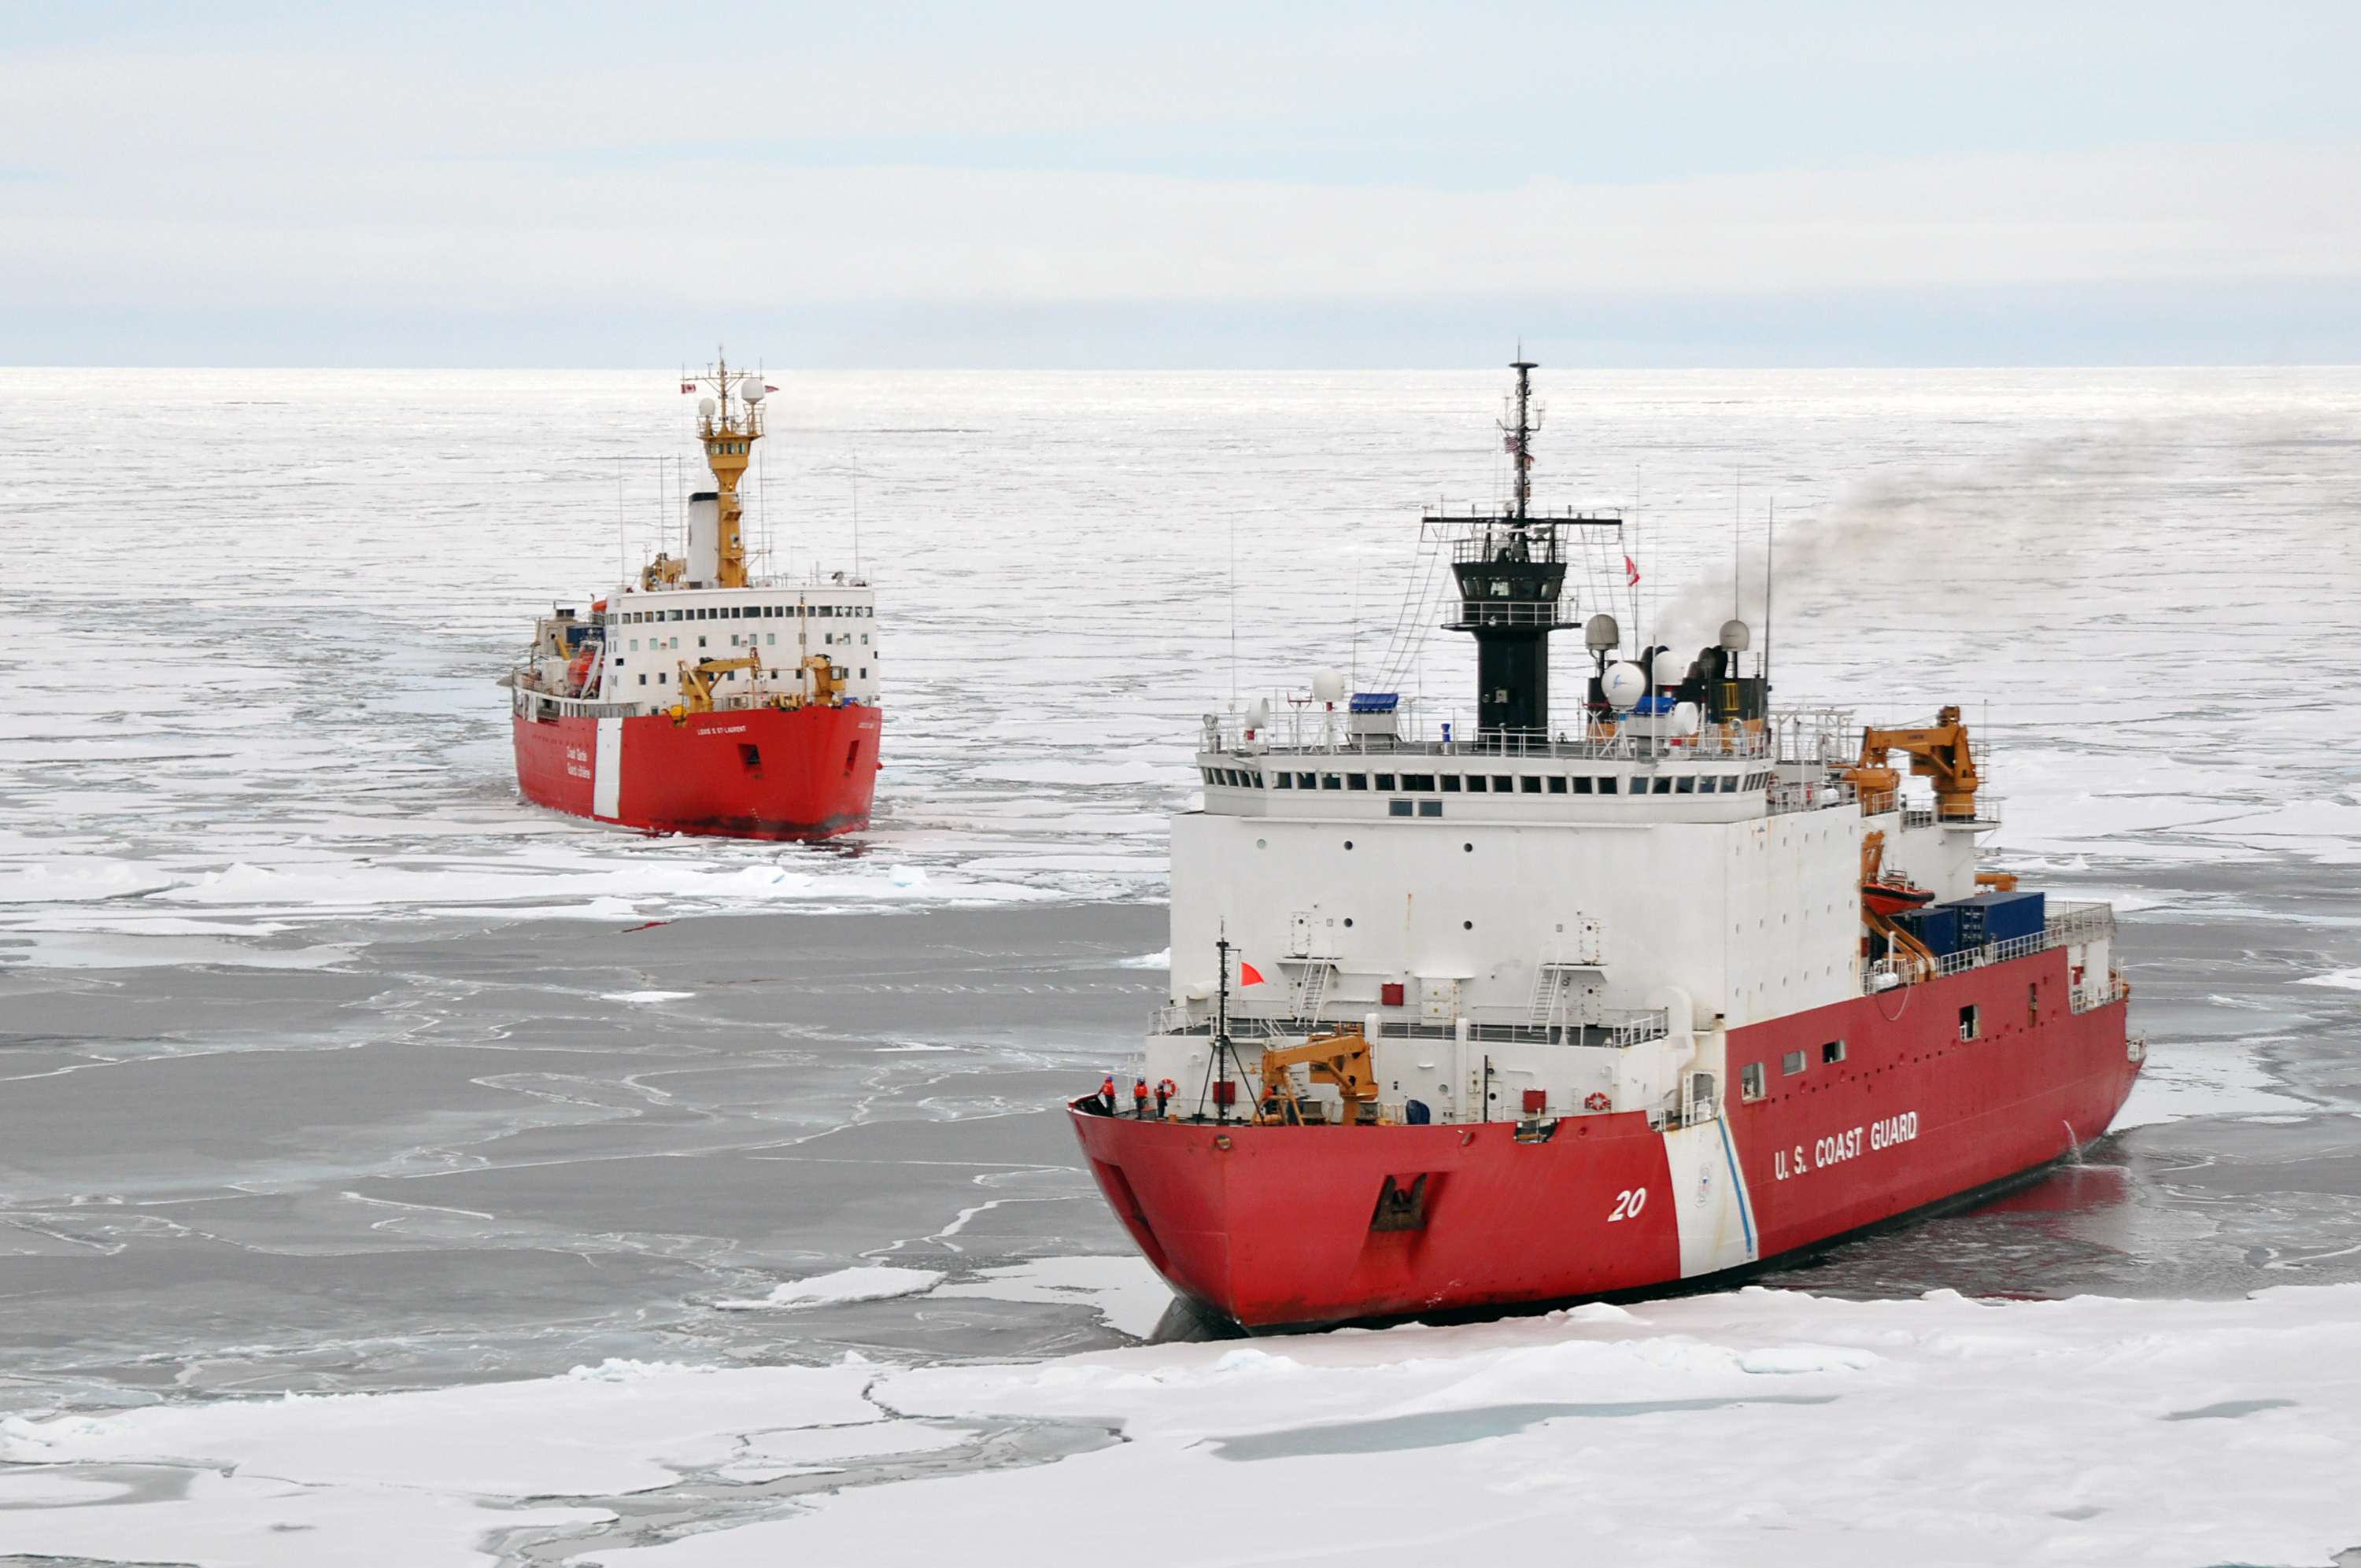 With Shrinking Arctic Sea Ice Comes Heightened National Security Concerns